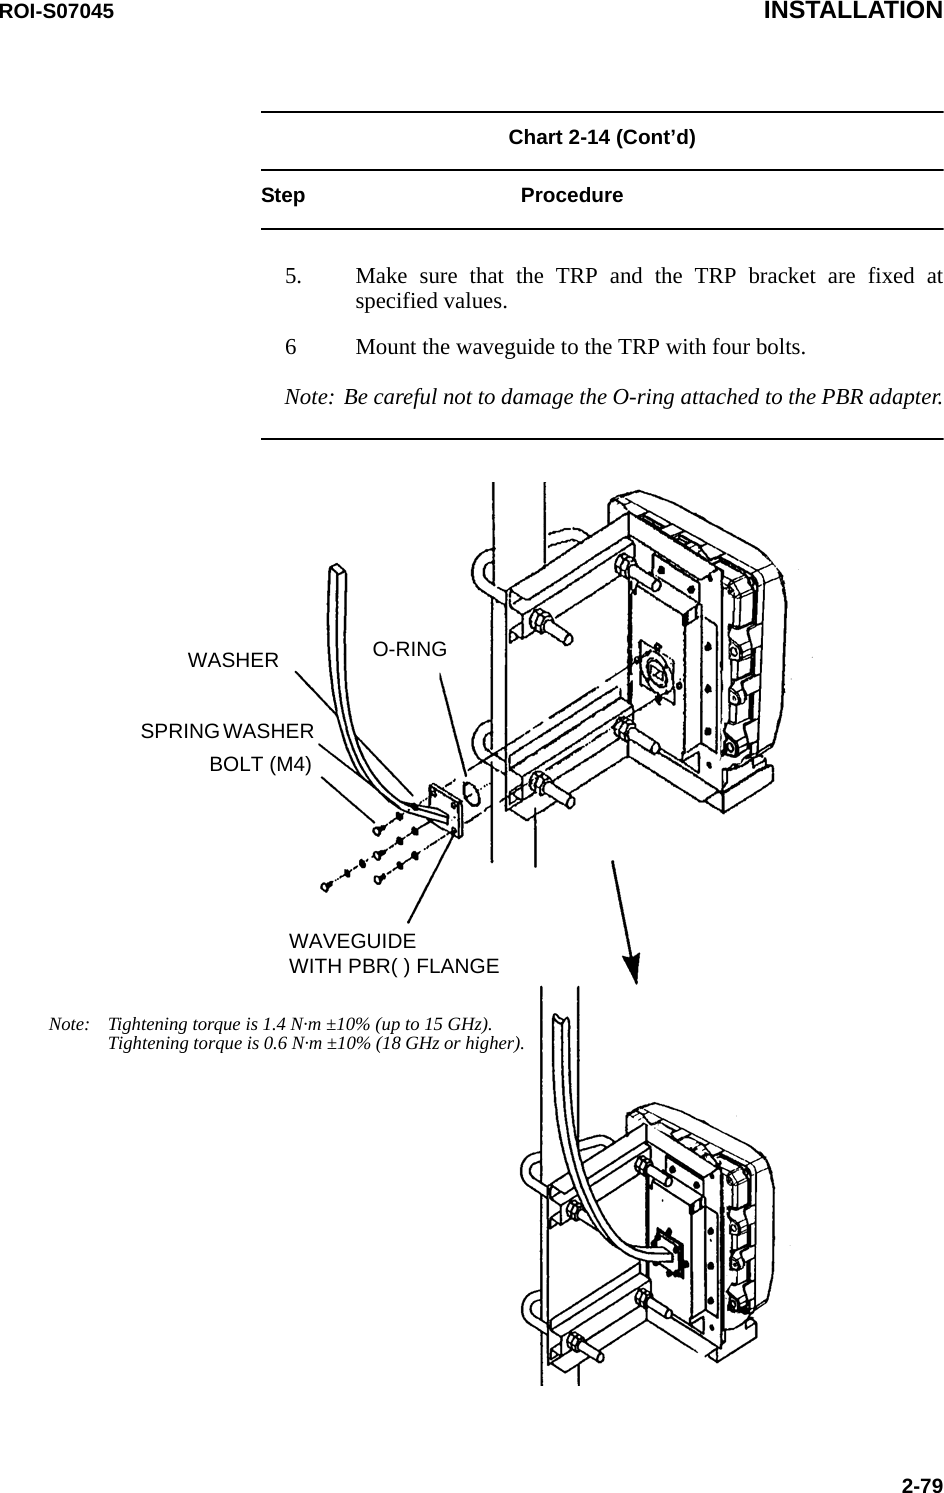 ROI-S07045 INSTALLATION2-79Chart 2-14 (Cont’d)Step Procedure5. Make sure that the TRP and the TRP bracket are fixed atspecified values.6 Mount the waveguide to the TRP with four bolts.Note: Be careful not to damage the O-ring attached to the PBR adapter.BOLT (M4)SPRING WASHER WASHER O-RINGWAVEGUIDEWITH PBR( ) FLANGENote: Tightening torque is 1.4 N·m ±10% (up to 15 GHz).Tightening torque is 0.6 N·m ±10% (18 GHz or higher).